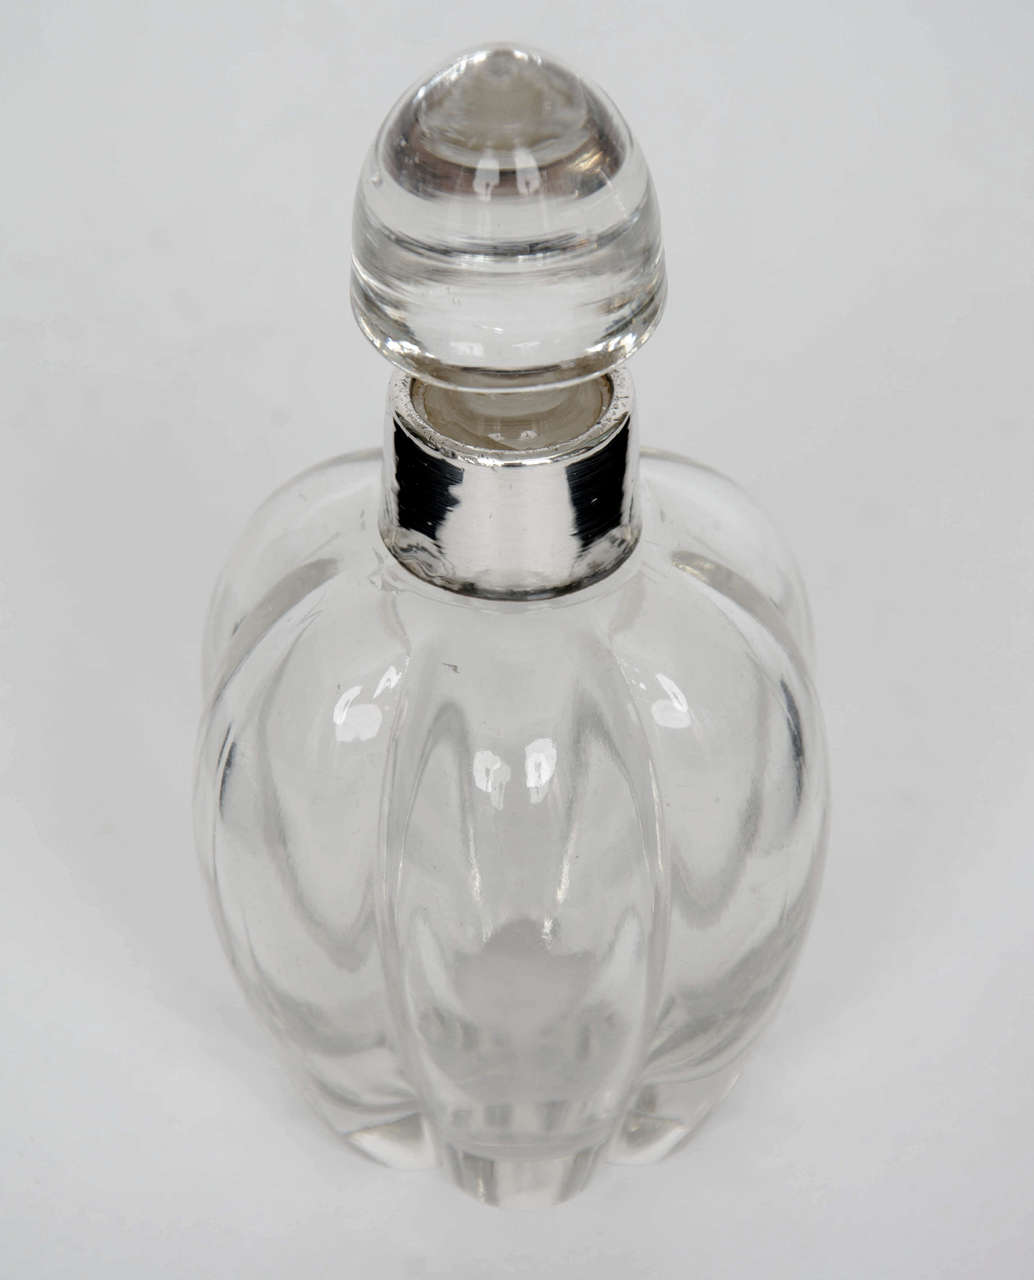 This is a beautiful perfume bottle from the Edwardian period of the early 20th century.

The bottle is made of glass, the body having six vertically fluted sections which form a baluster shape, drawing together at the neck with a solid silver neck